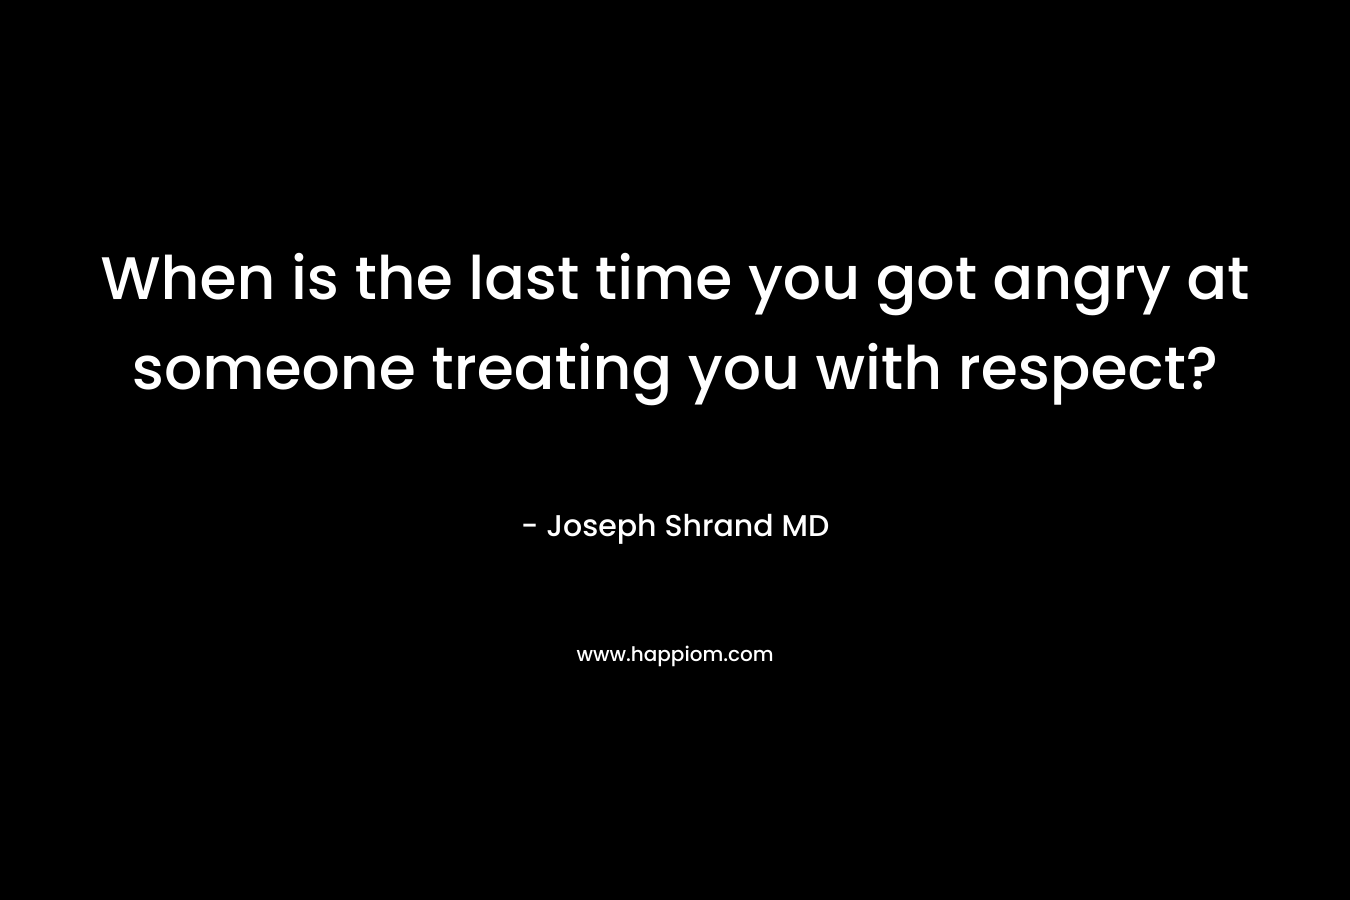 When is the last time you got angry at someone treating you with respect? – Joseph Shrand MD